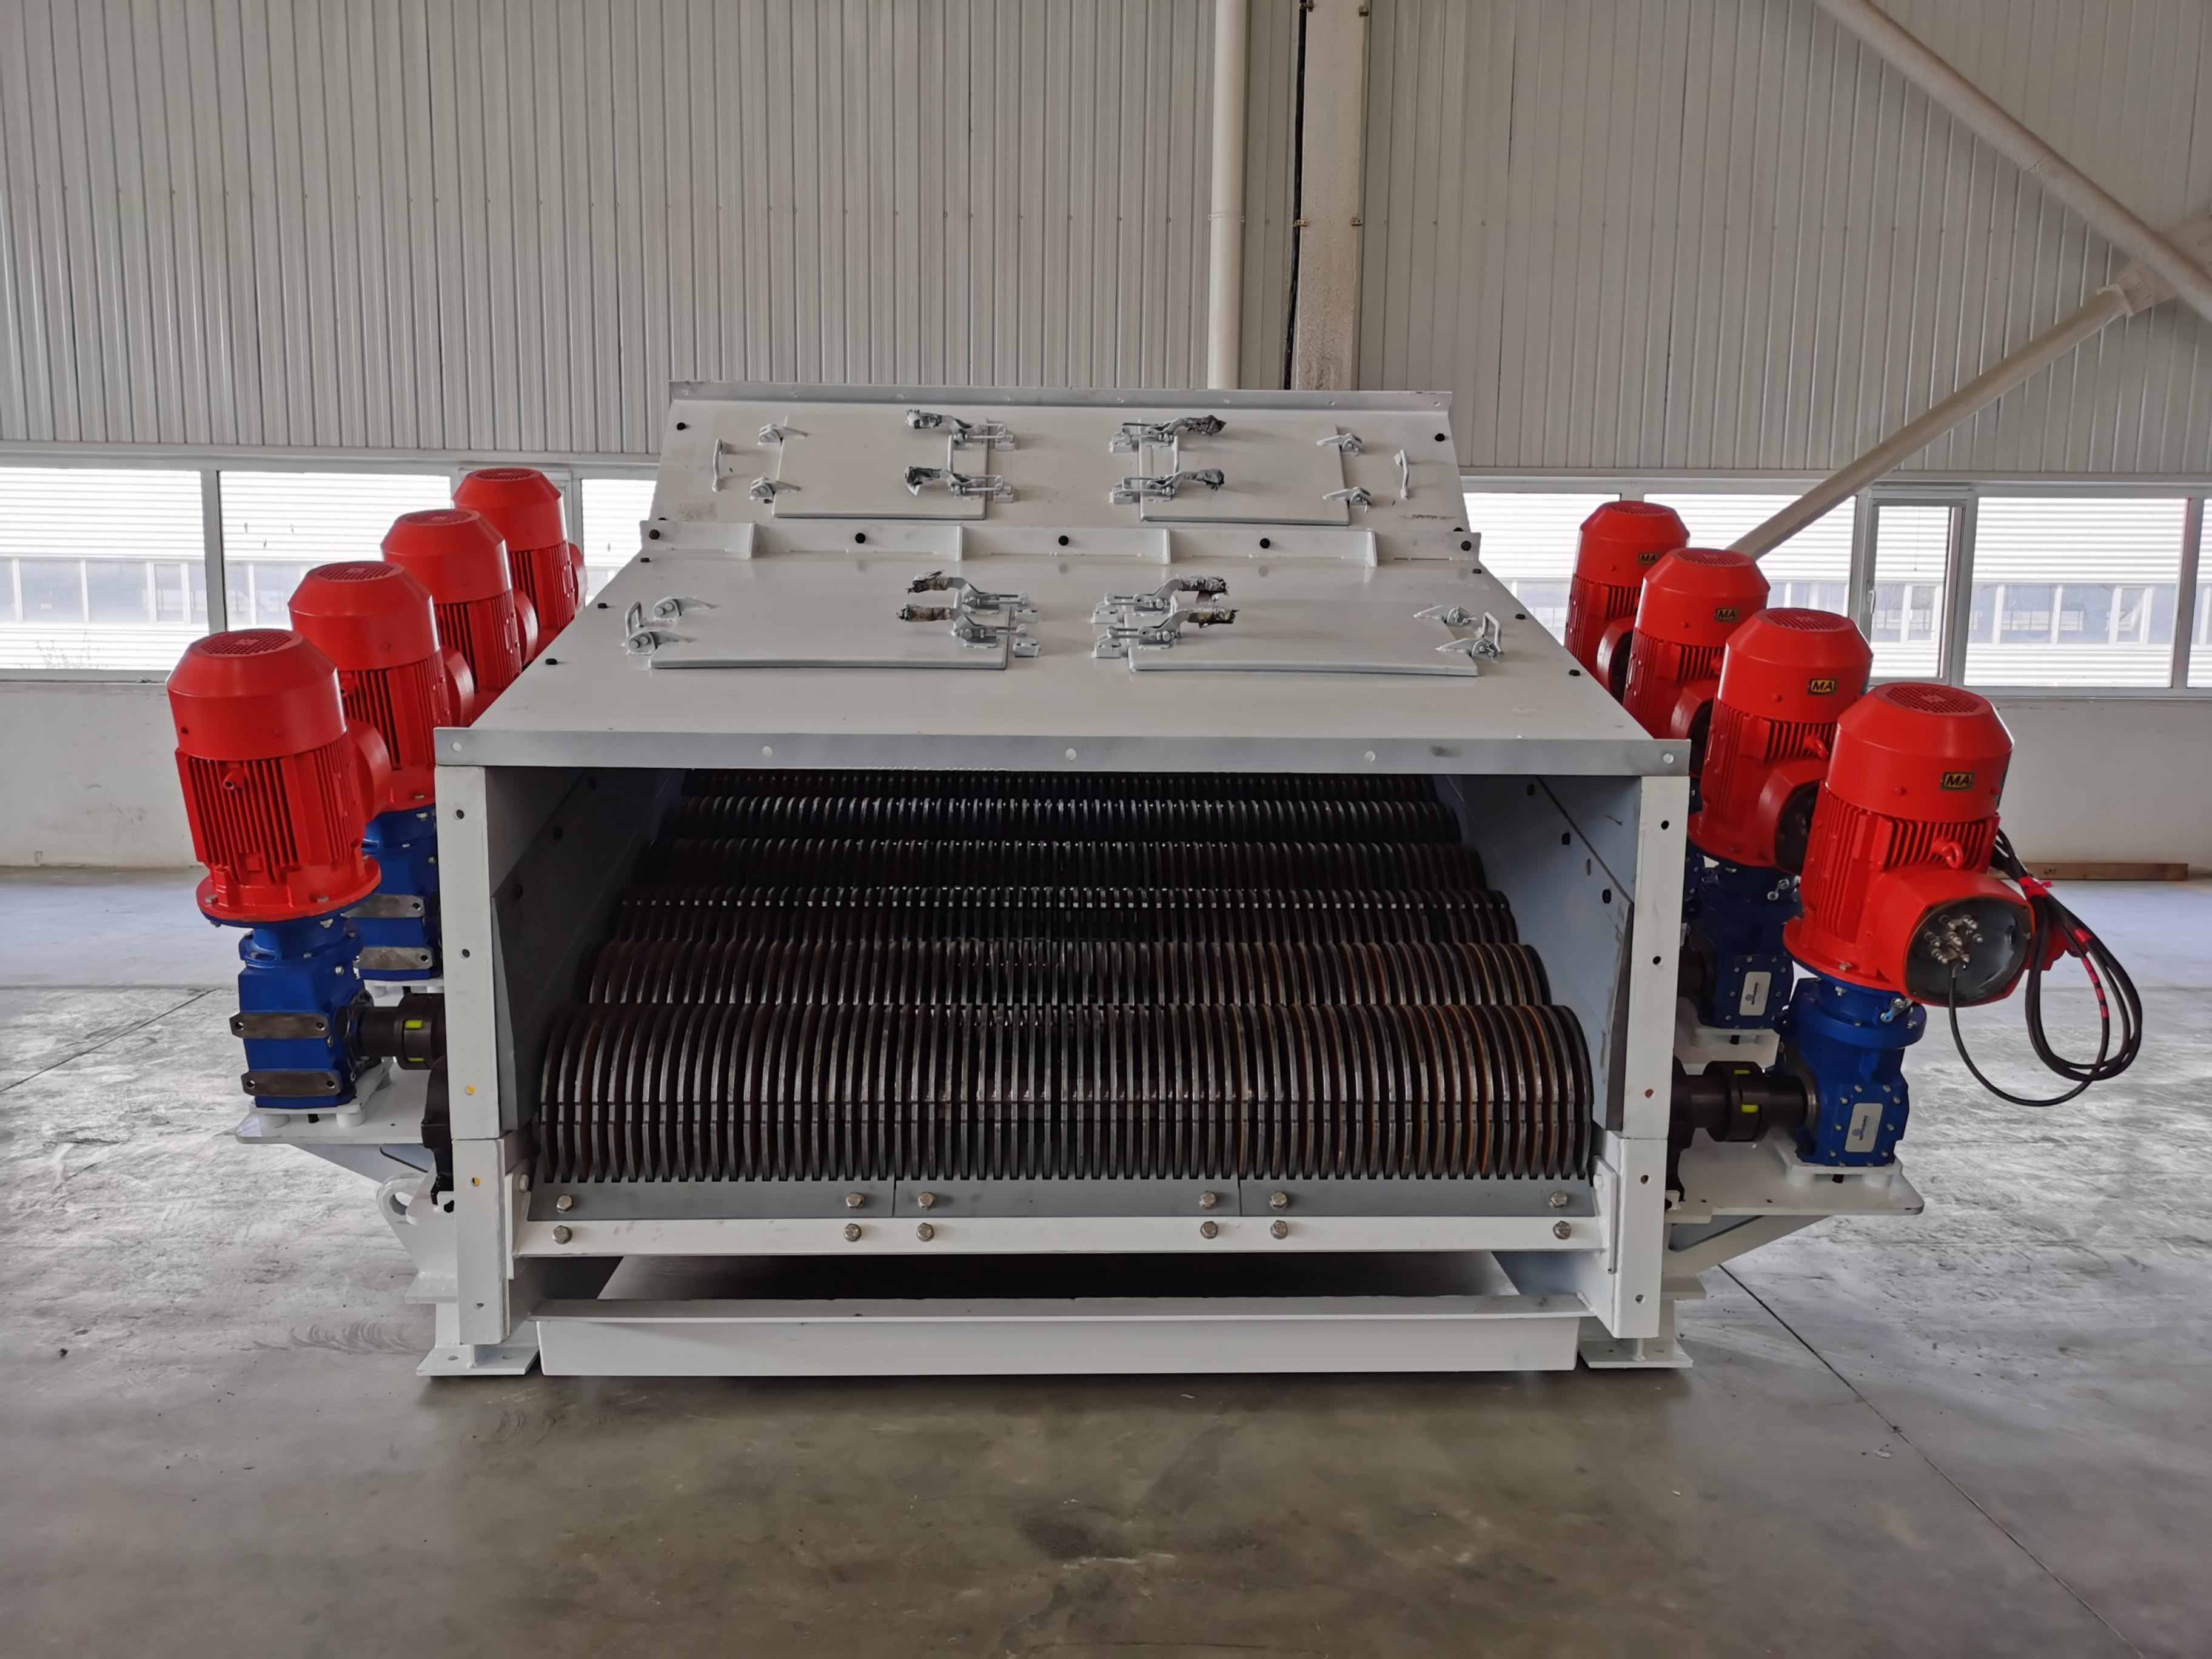 roller-disc-screen-for-in-depth-fines-removal-classification-size-fraction-2.5-25mm-coal-washing-plant-HOT-Mining-5.jpg